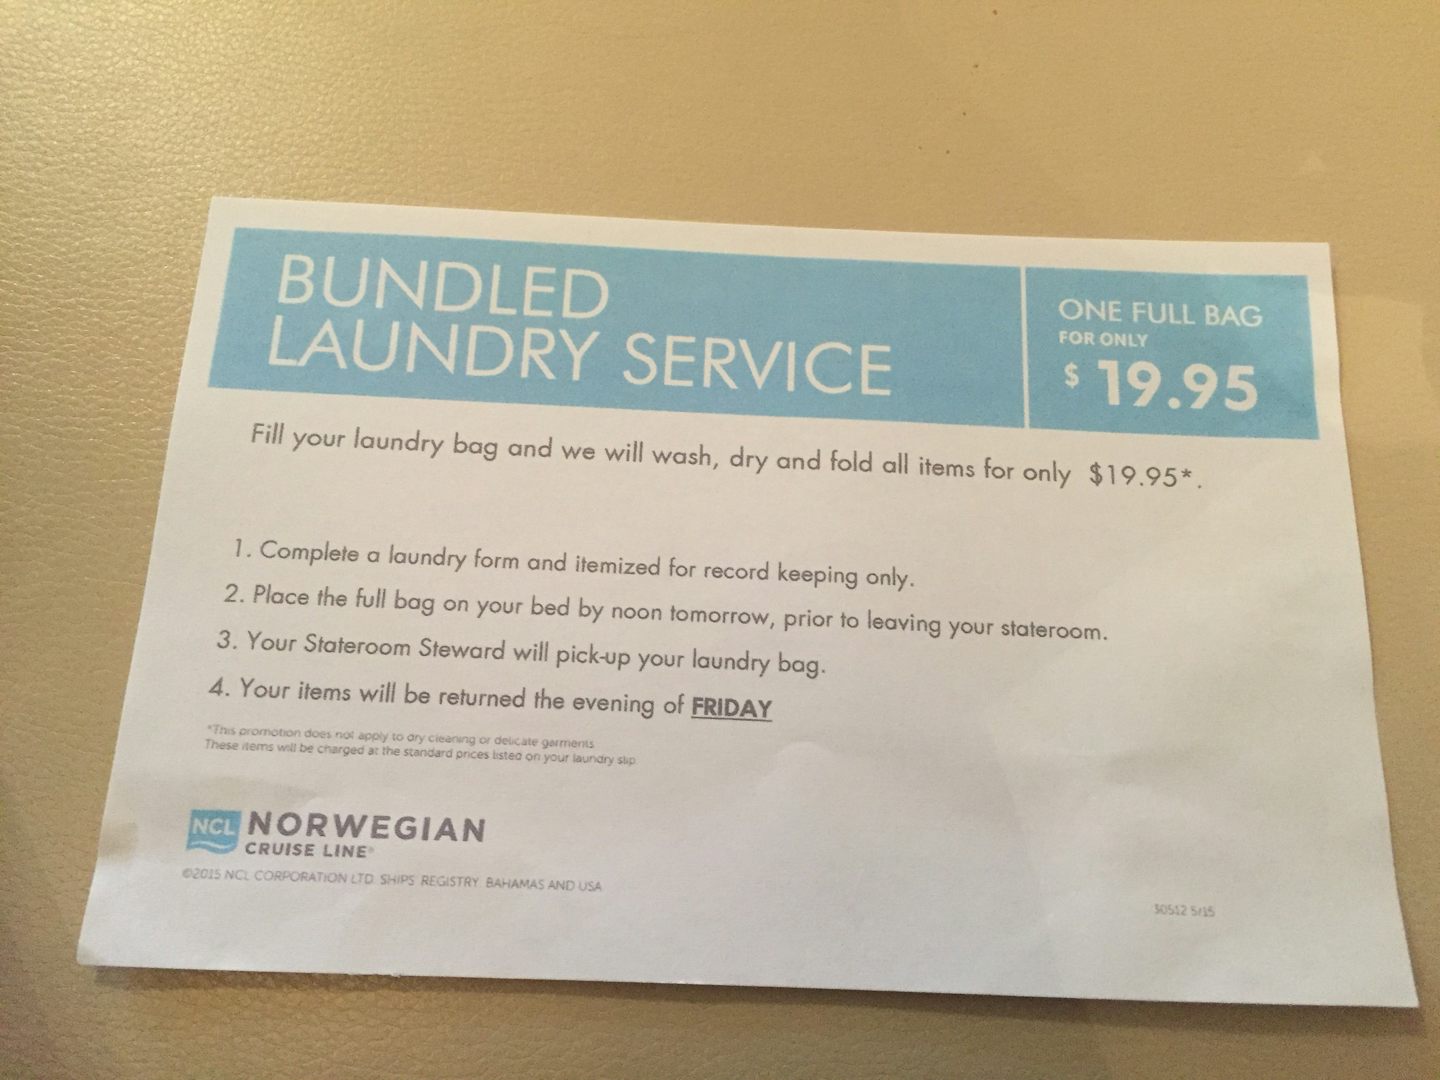 No self serve laundry! On Wed. they will wash/fold & return to you on Frida